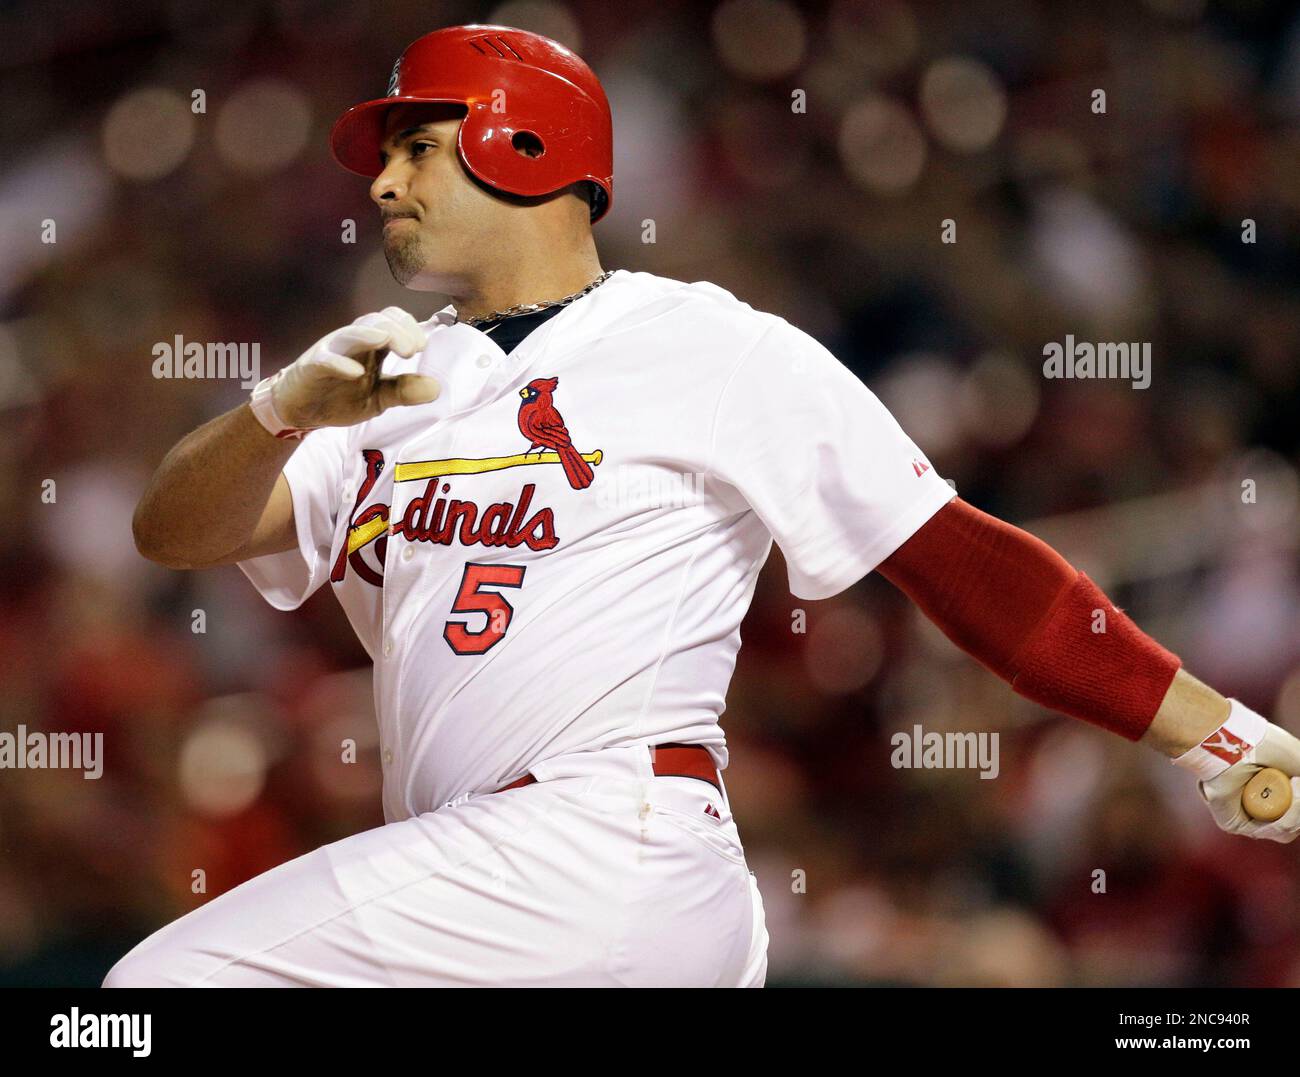 FILE - This Sept. 30, 2010, file photo shows St. Louis Cardinals first  baseman Albert Pujols following through on an RBI double during the first  inning of a baseball game against the